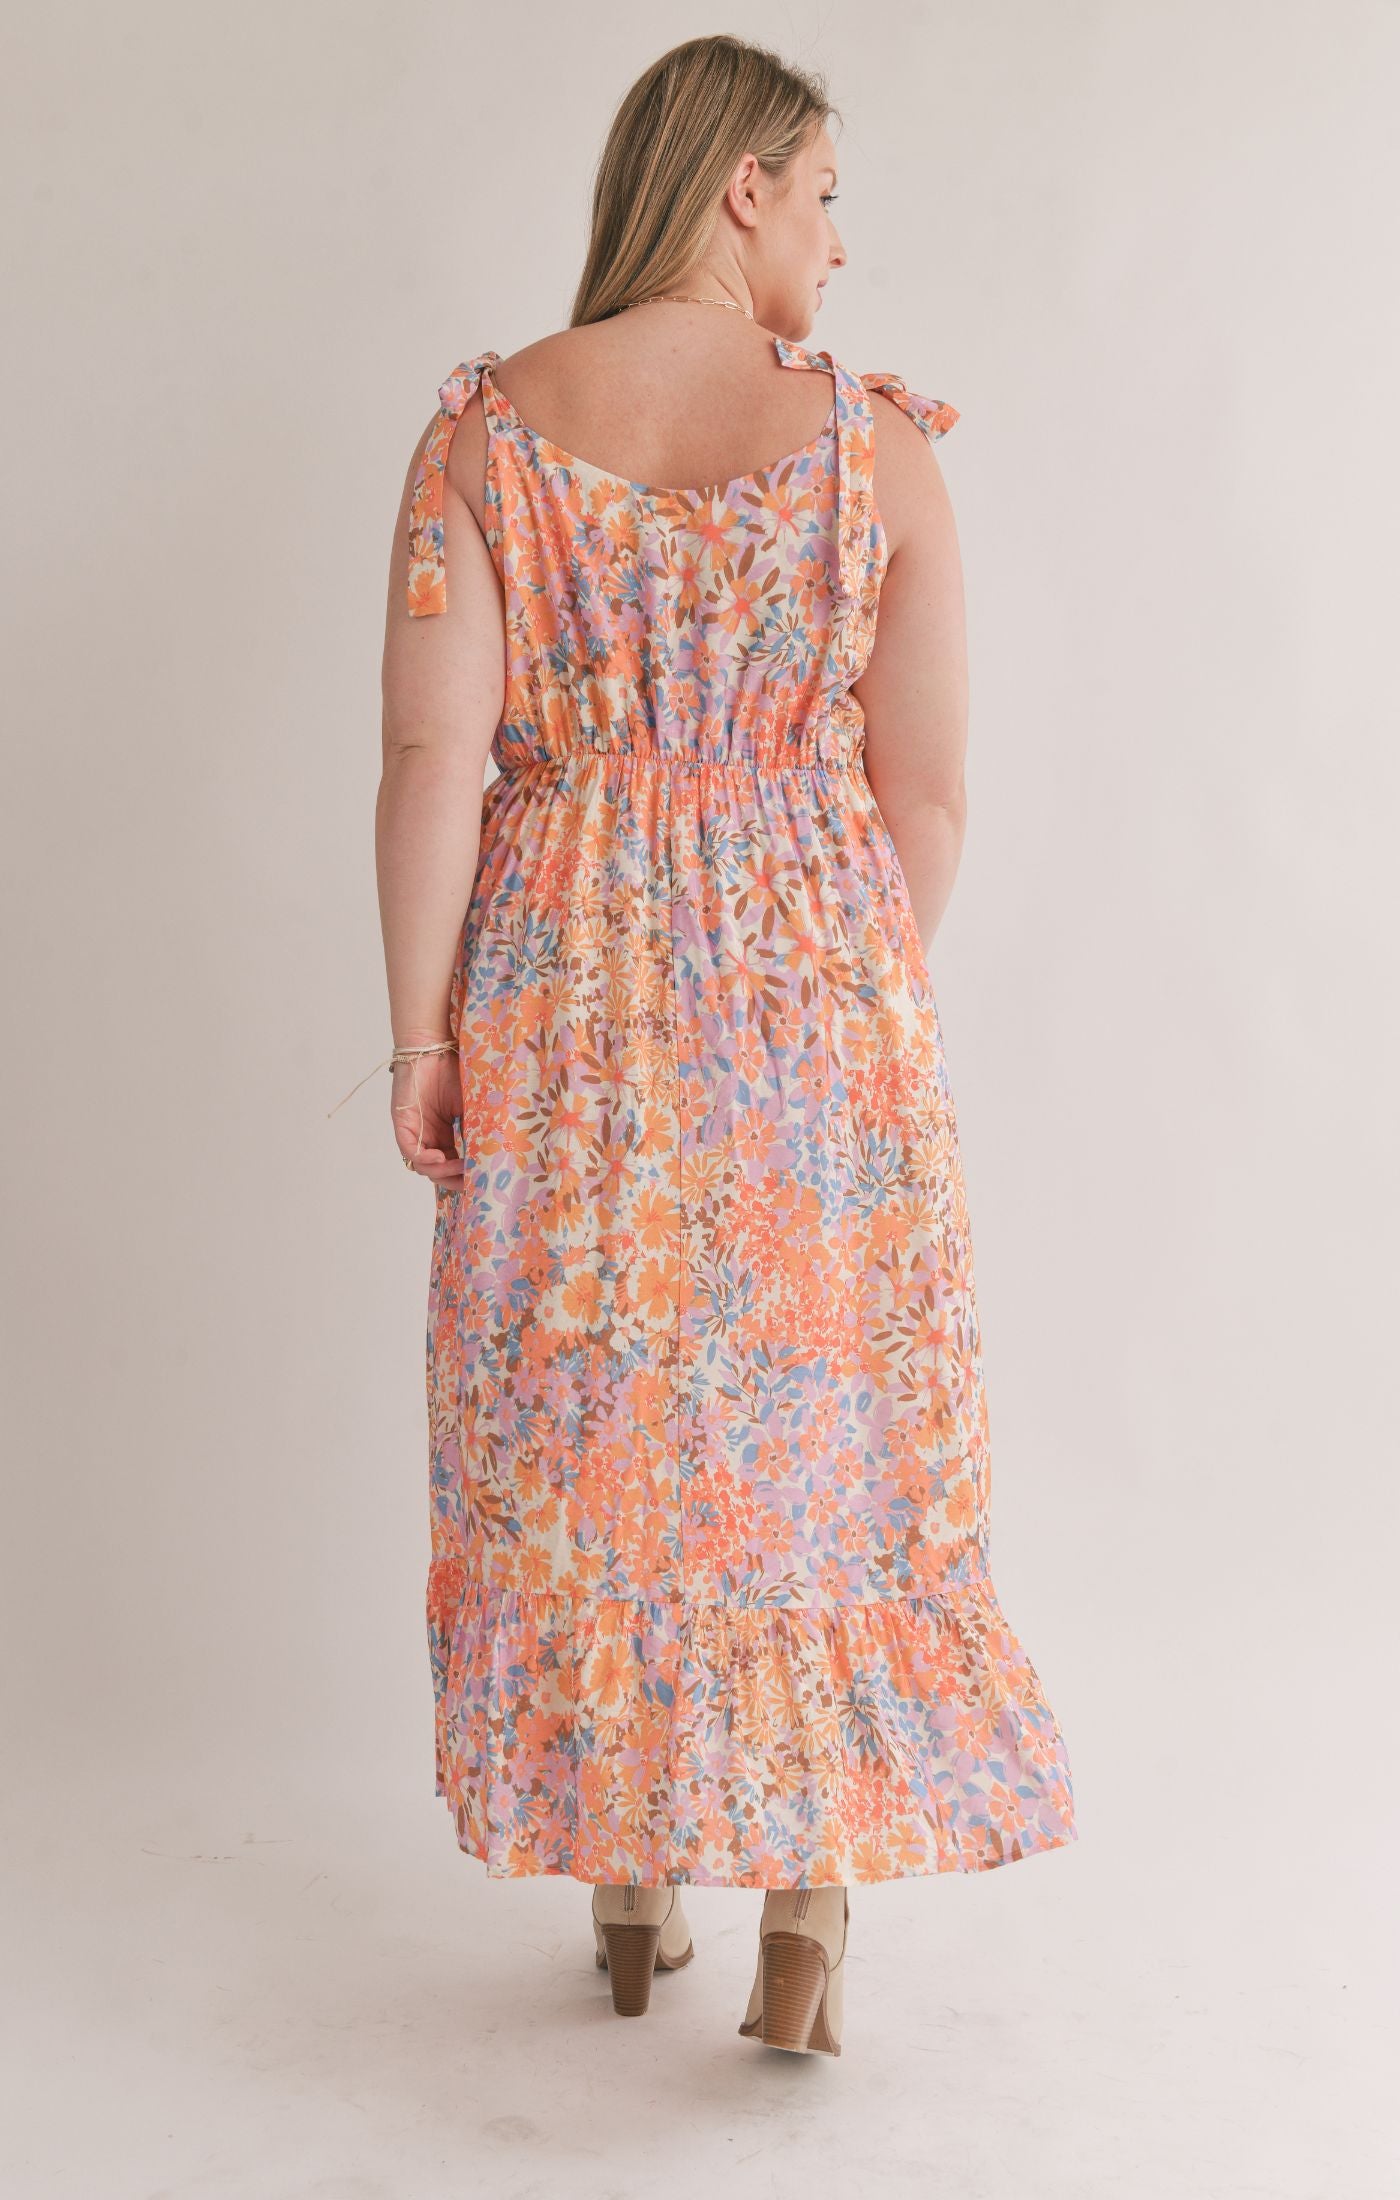 PLUS Moonscapes Tiered Midi Dress with Tie Straps - Multi Color